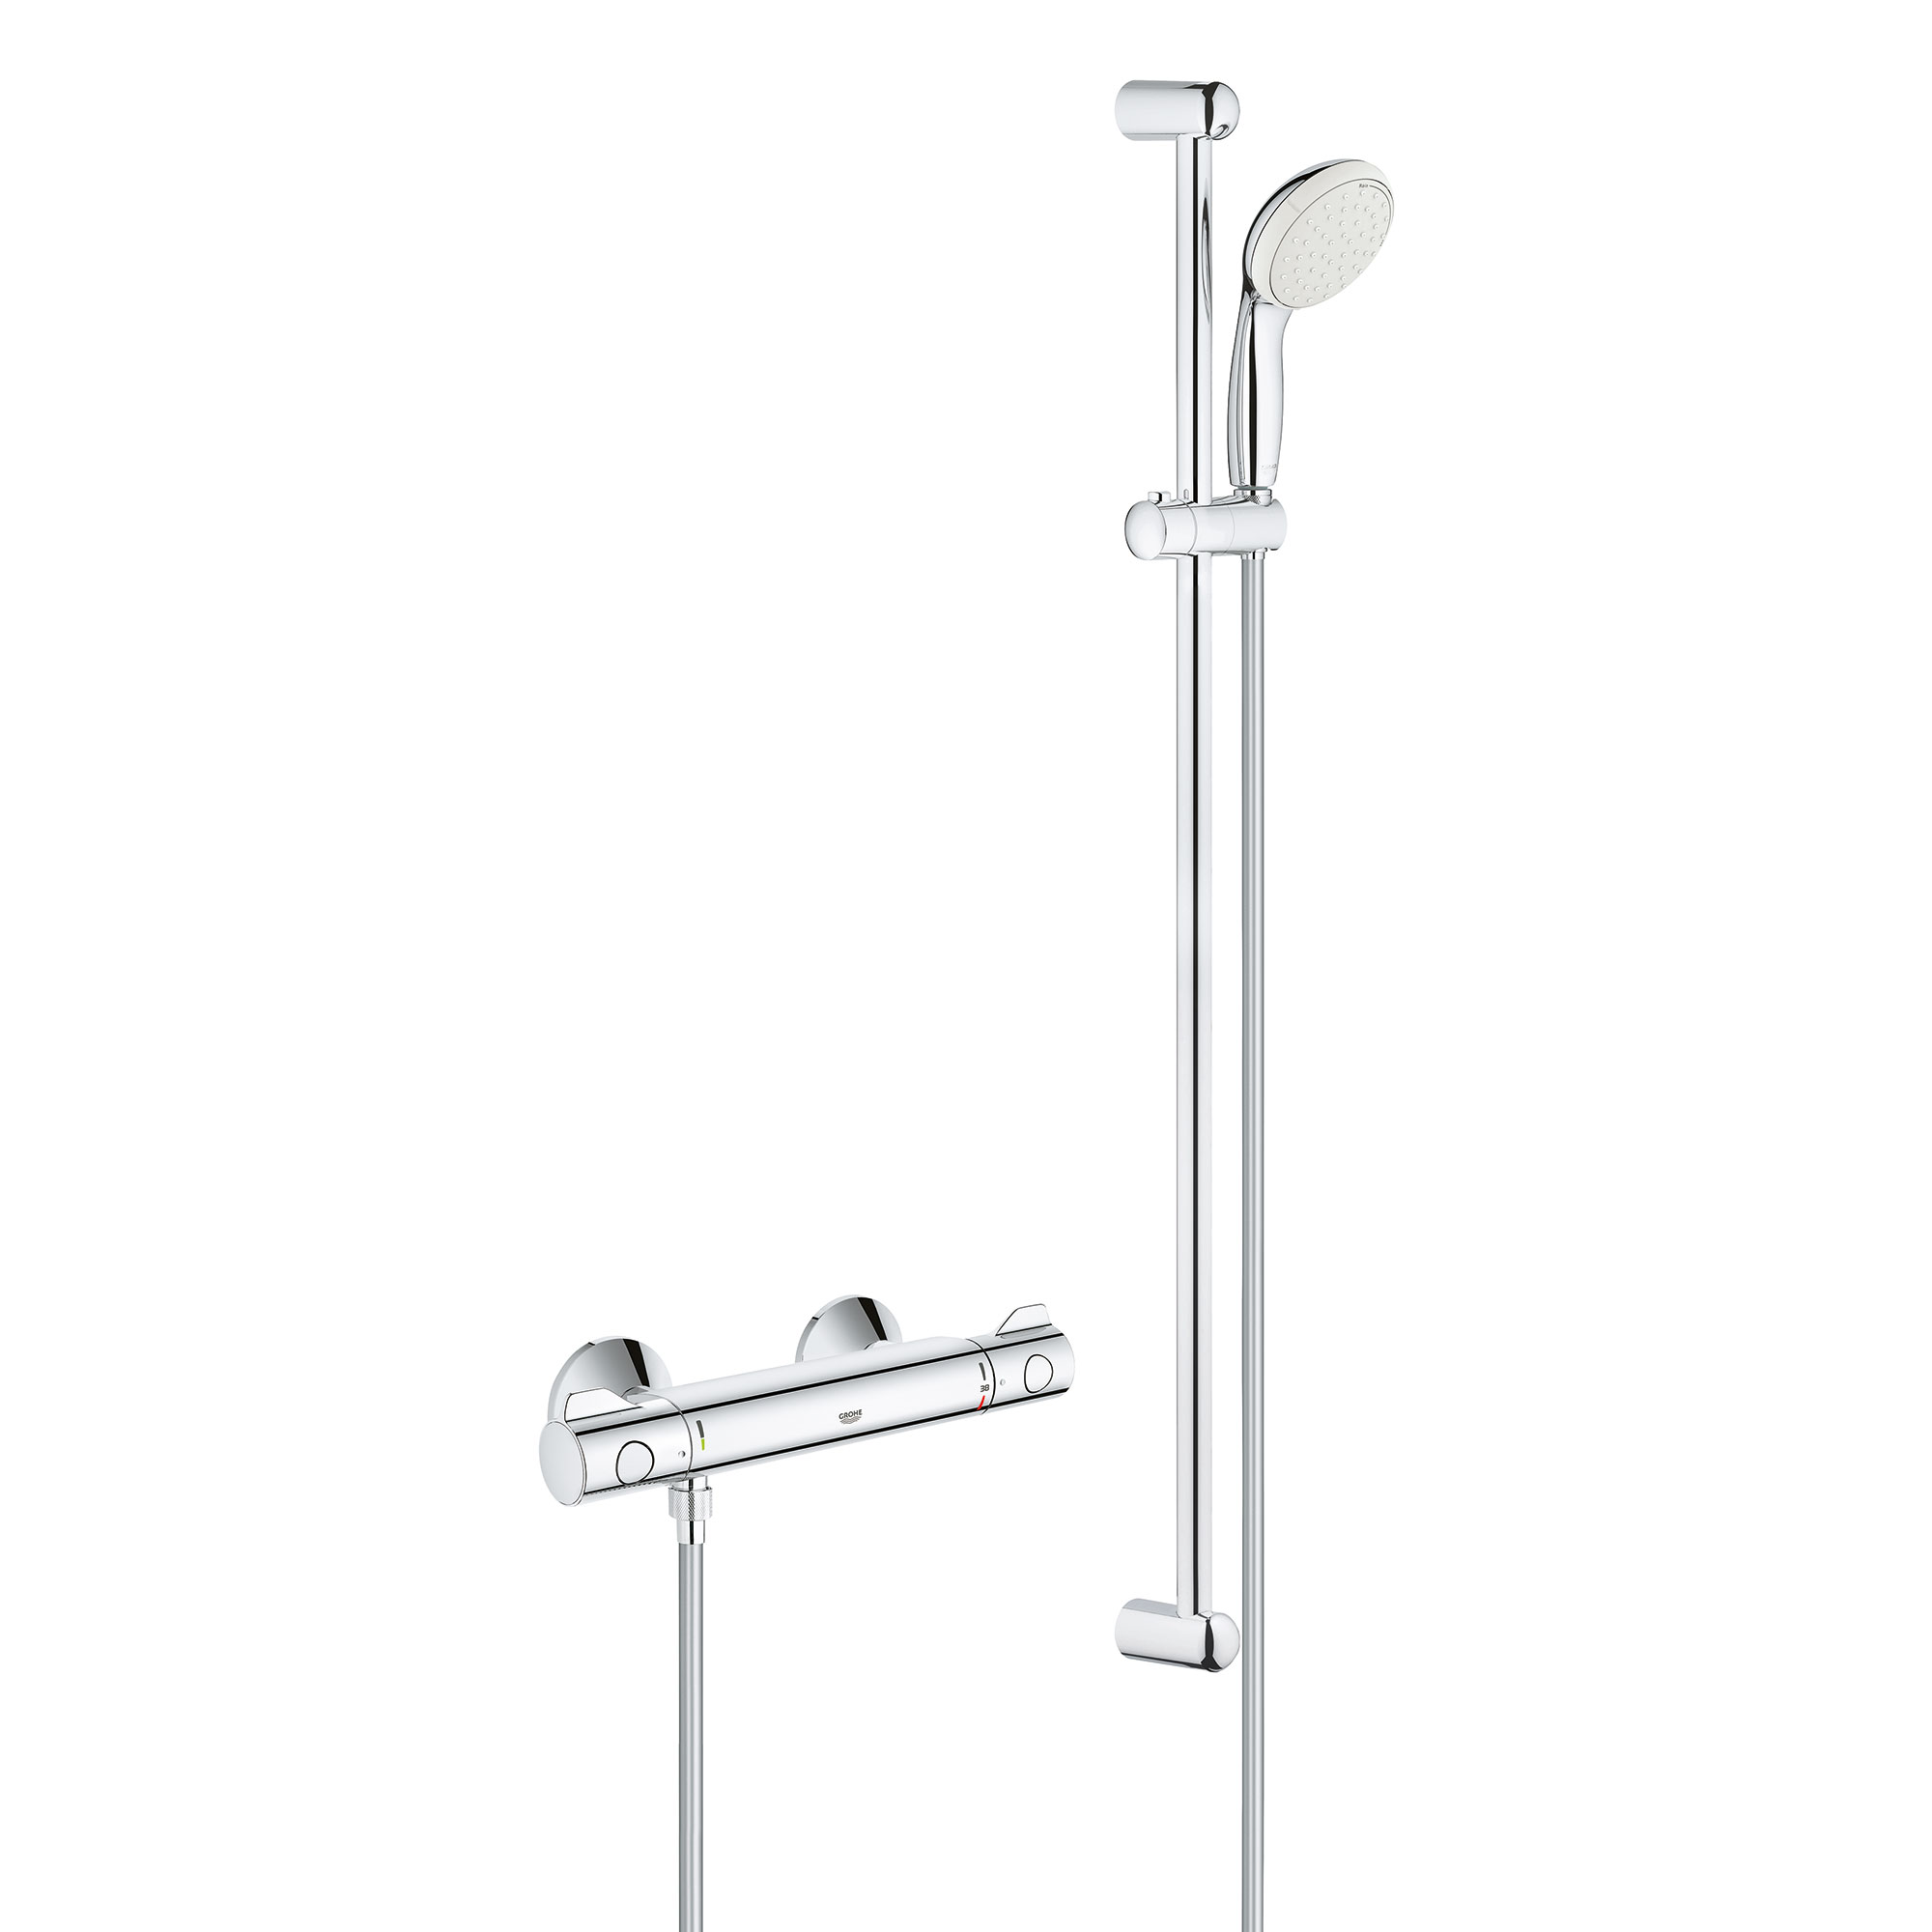 Duschset Grohe Grotherm Nordic 800 150 cc